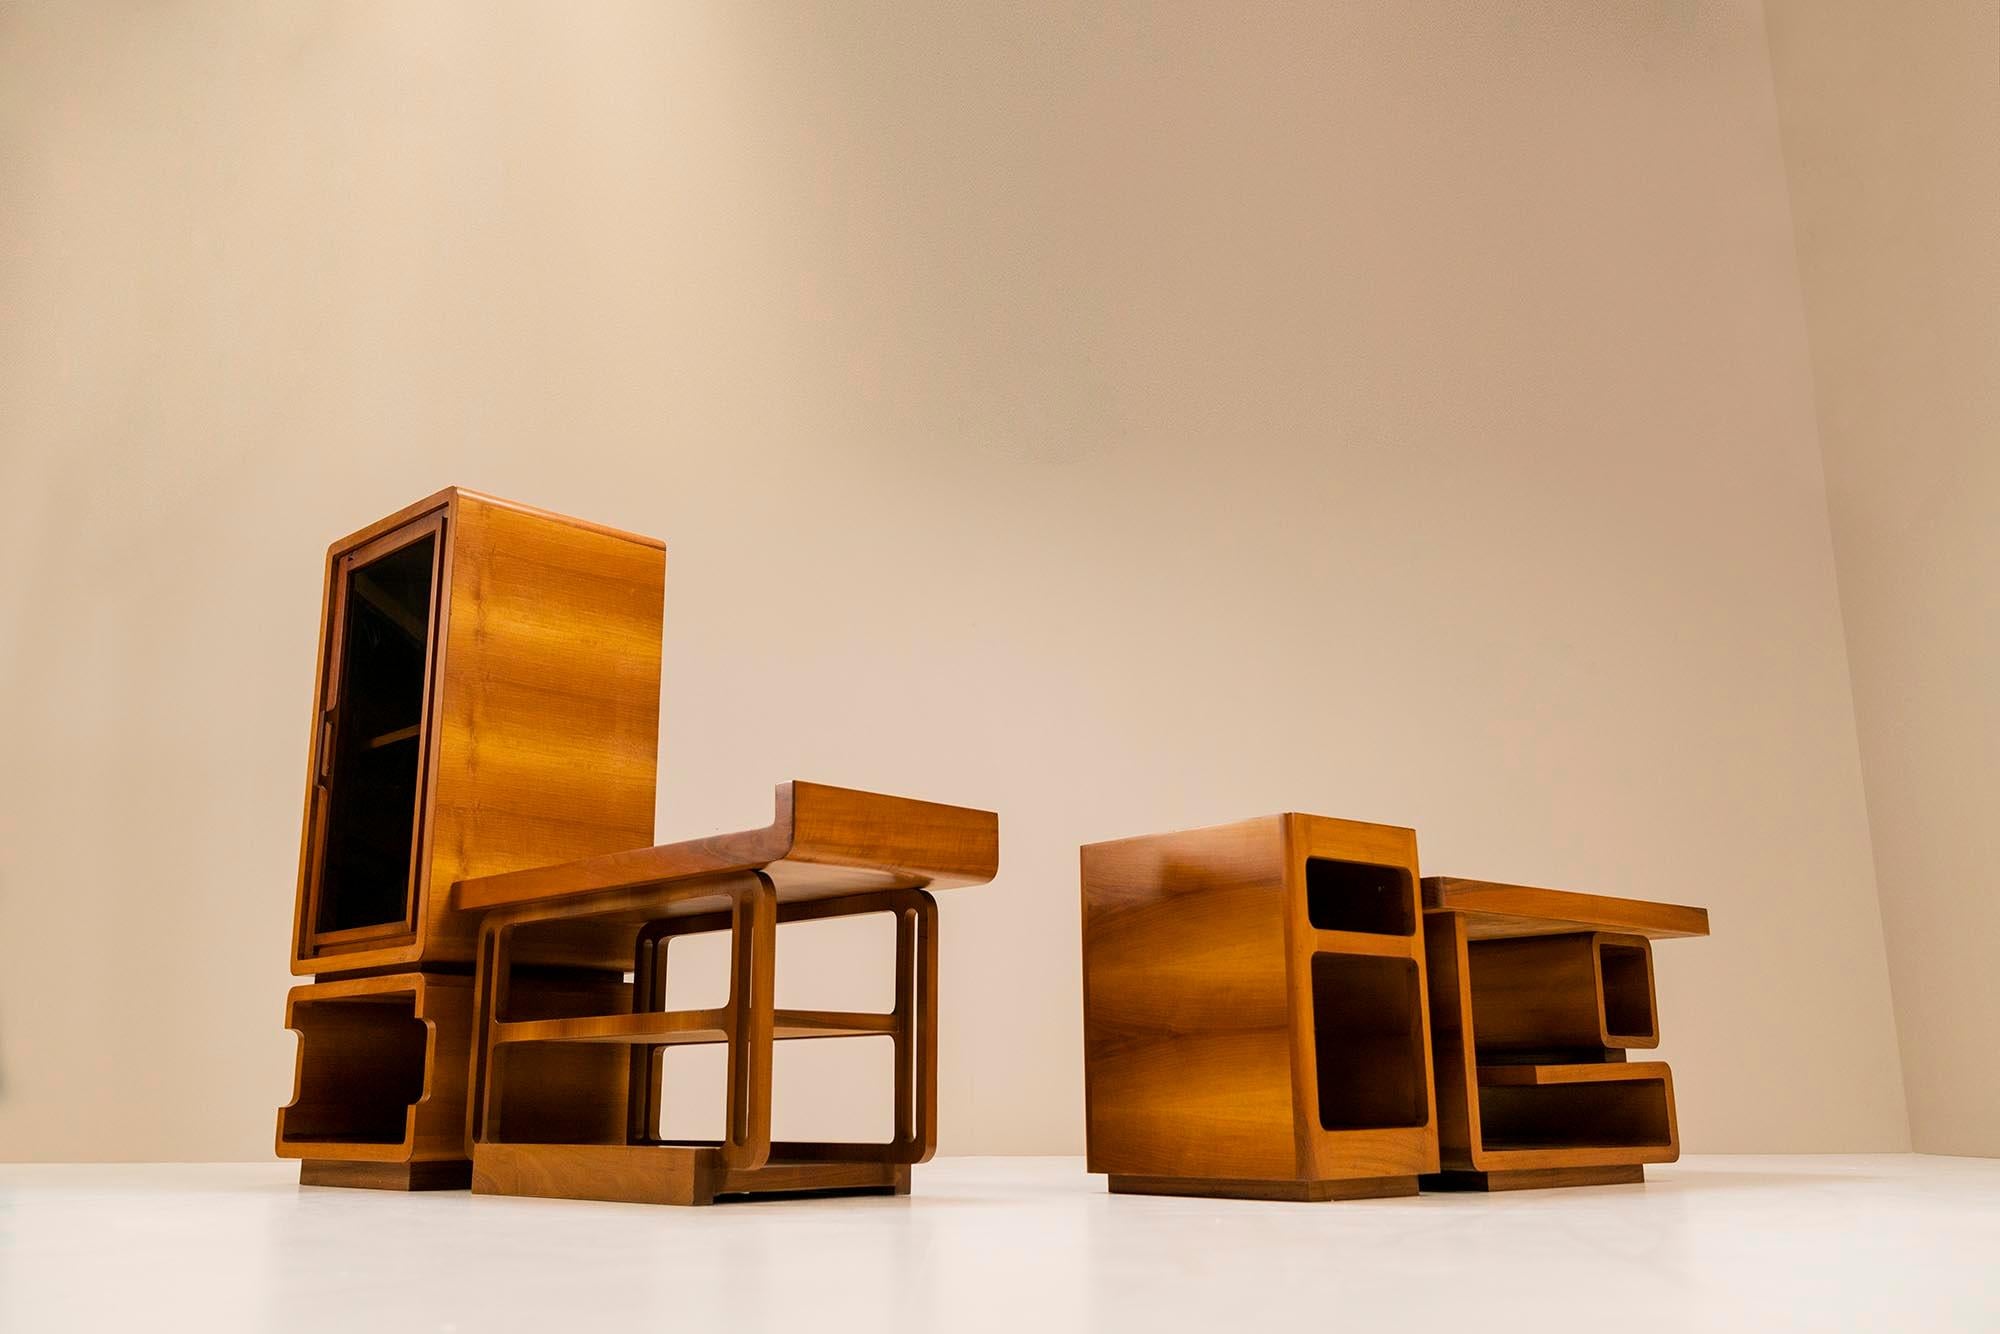 Italian Modernist Showcase Cabinet and Coffee Table in Walnut, Italy, 1960s For Sale